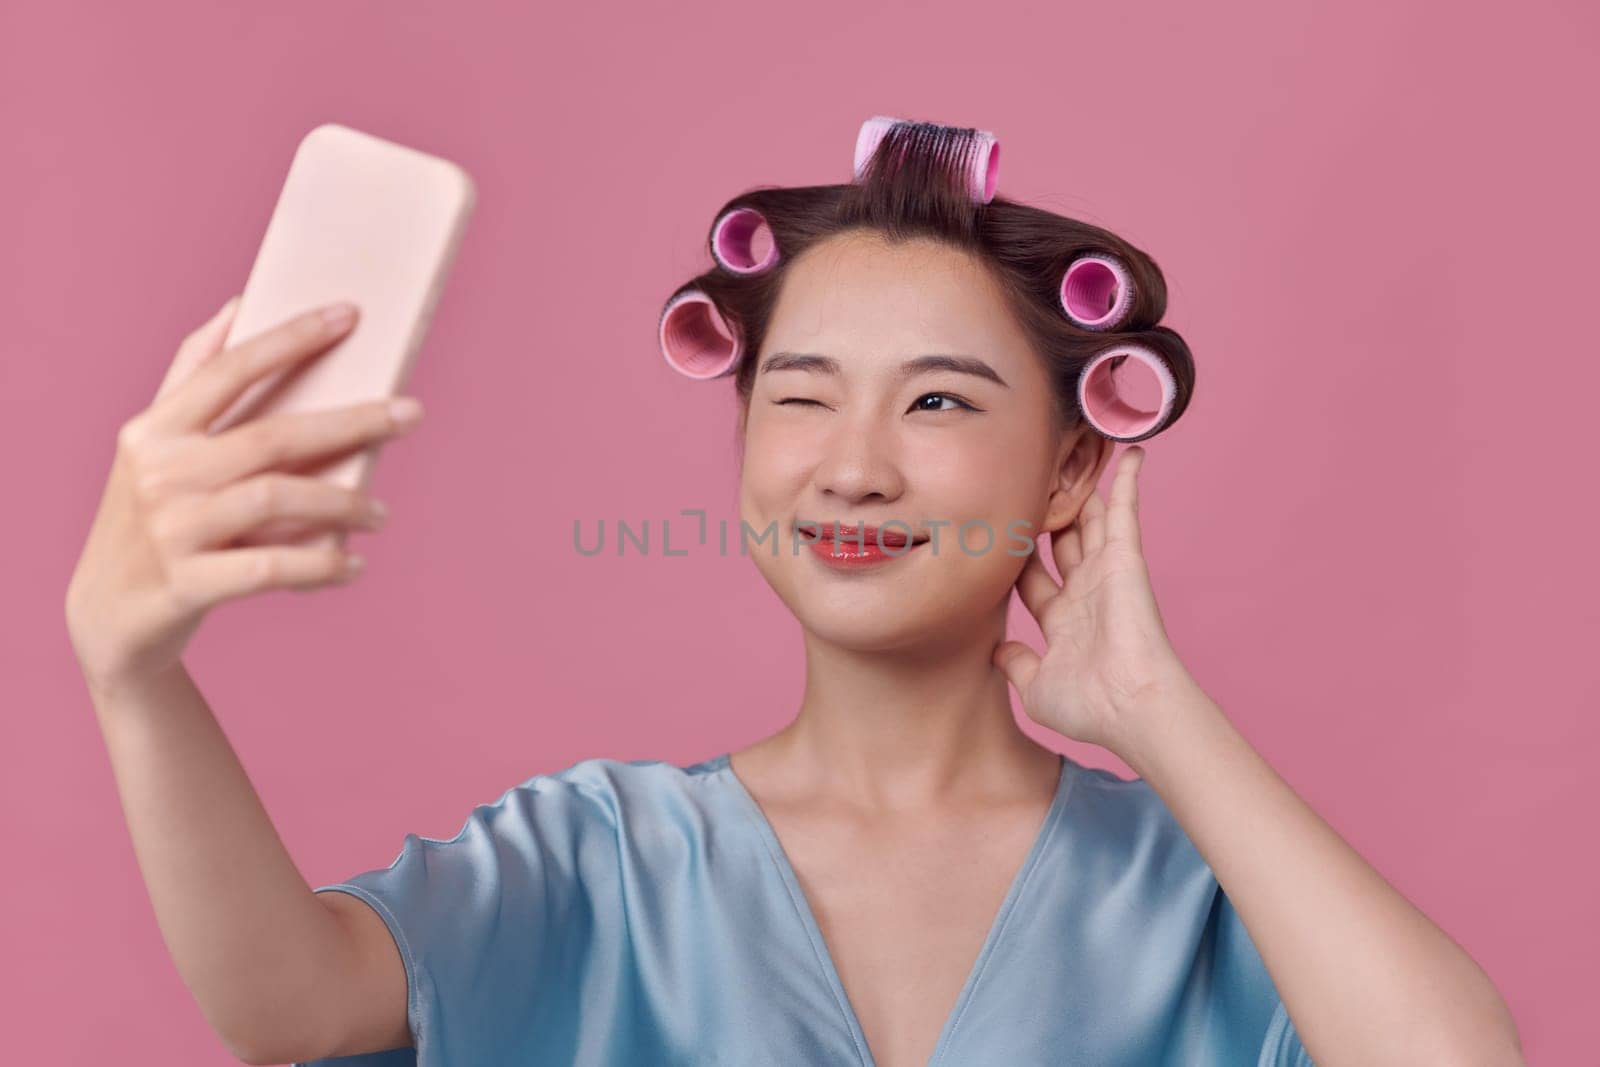 cheerful woman applies hair curlers posing in smartphone camera dressed over pink background.